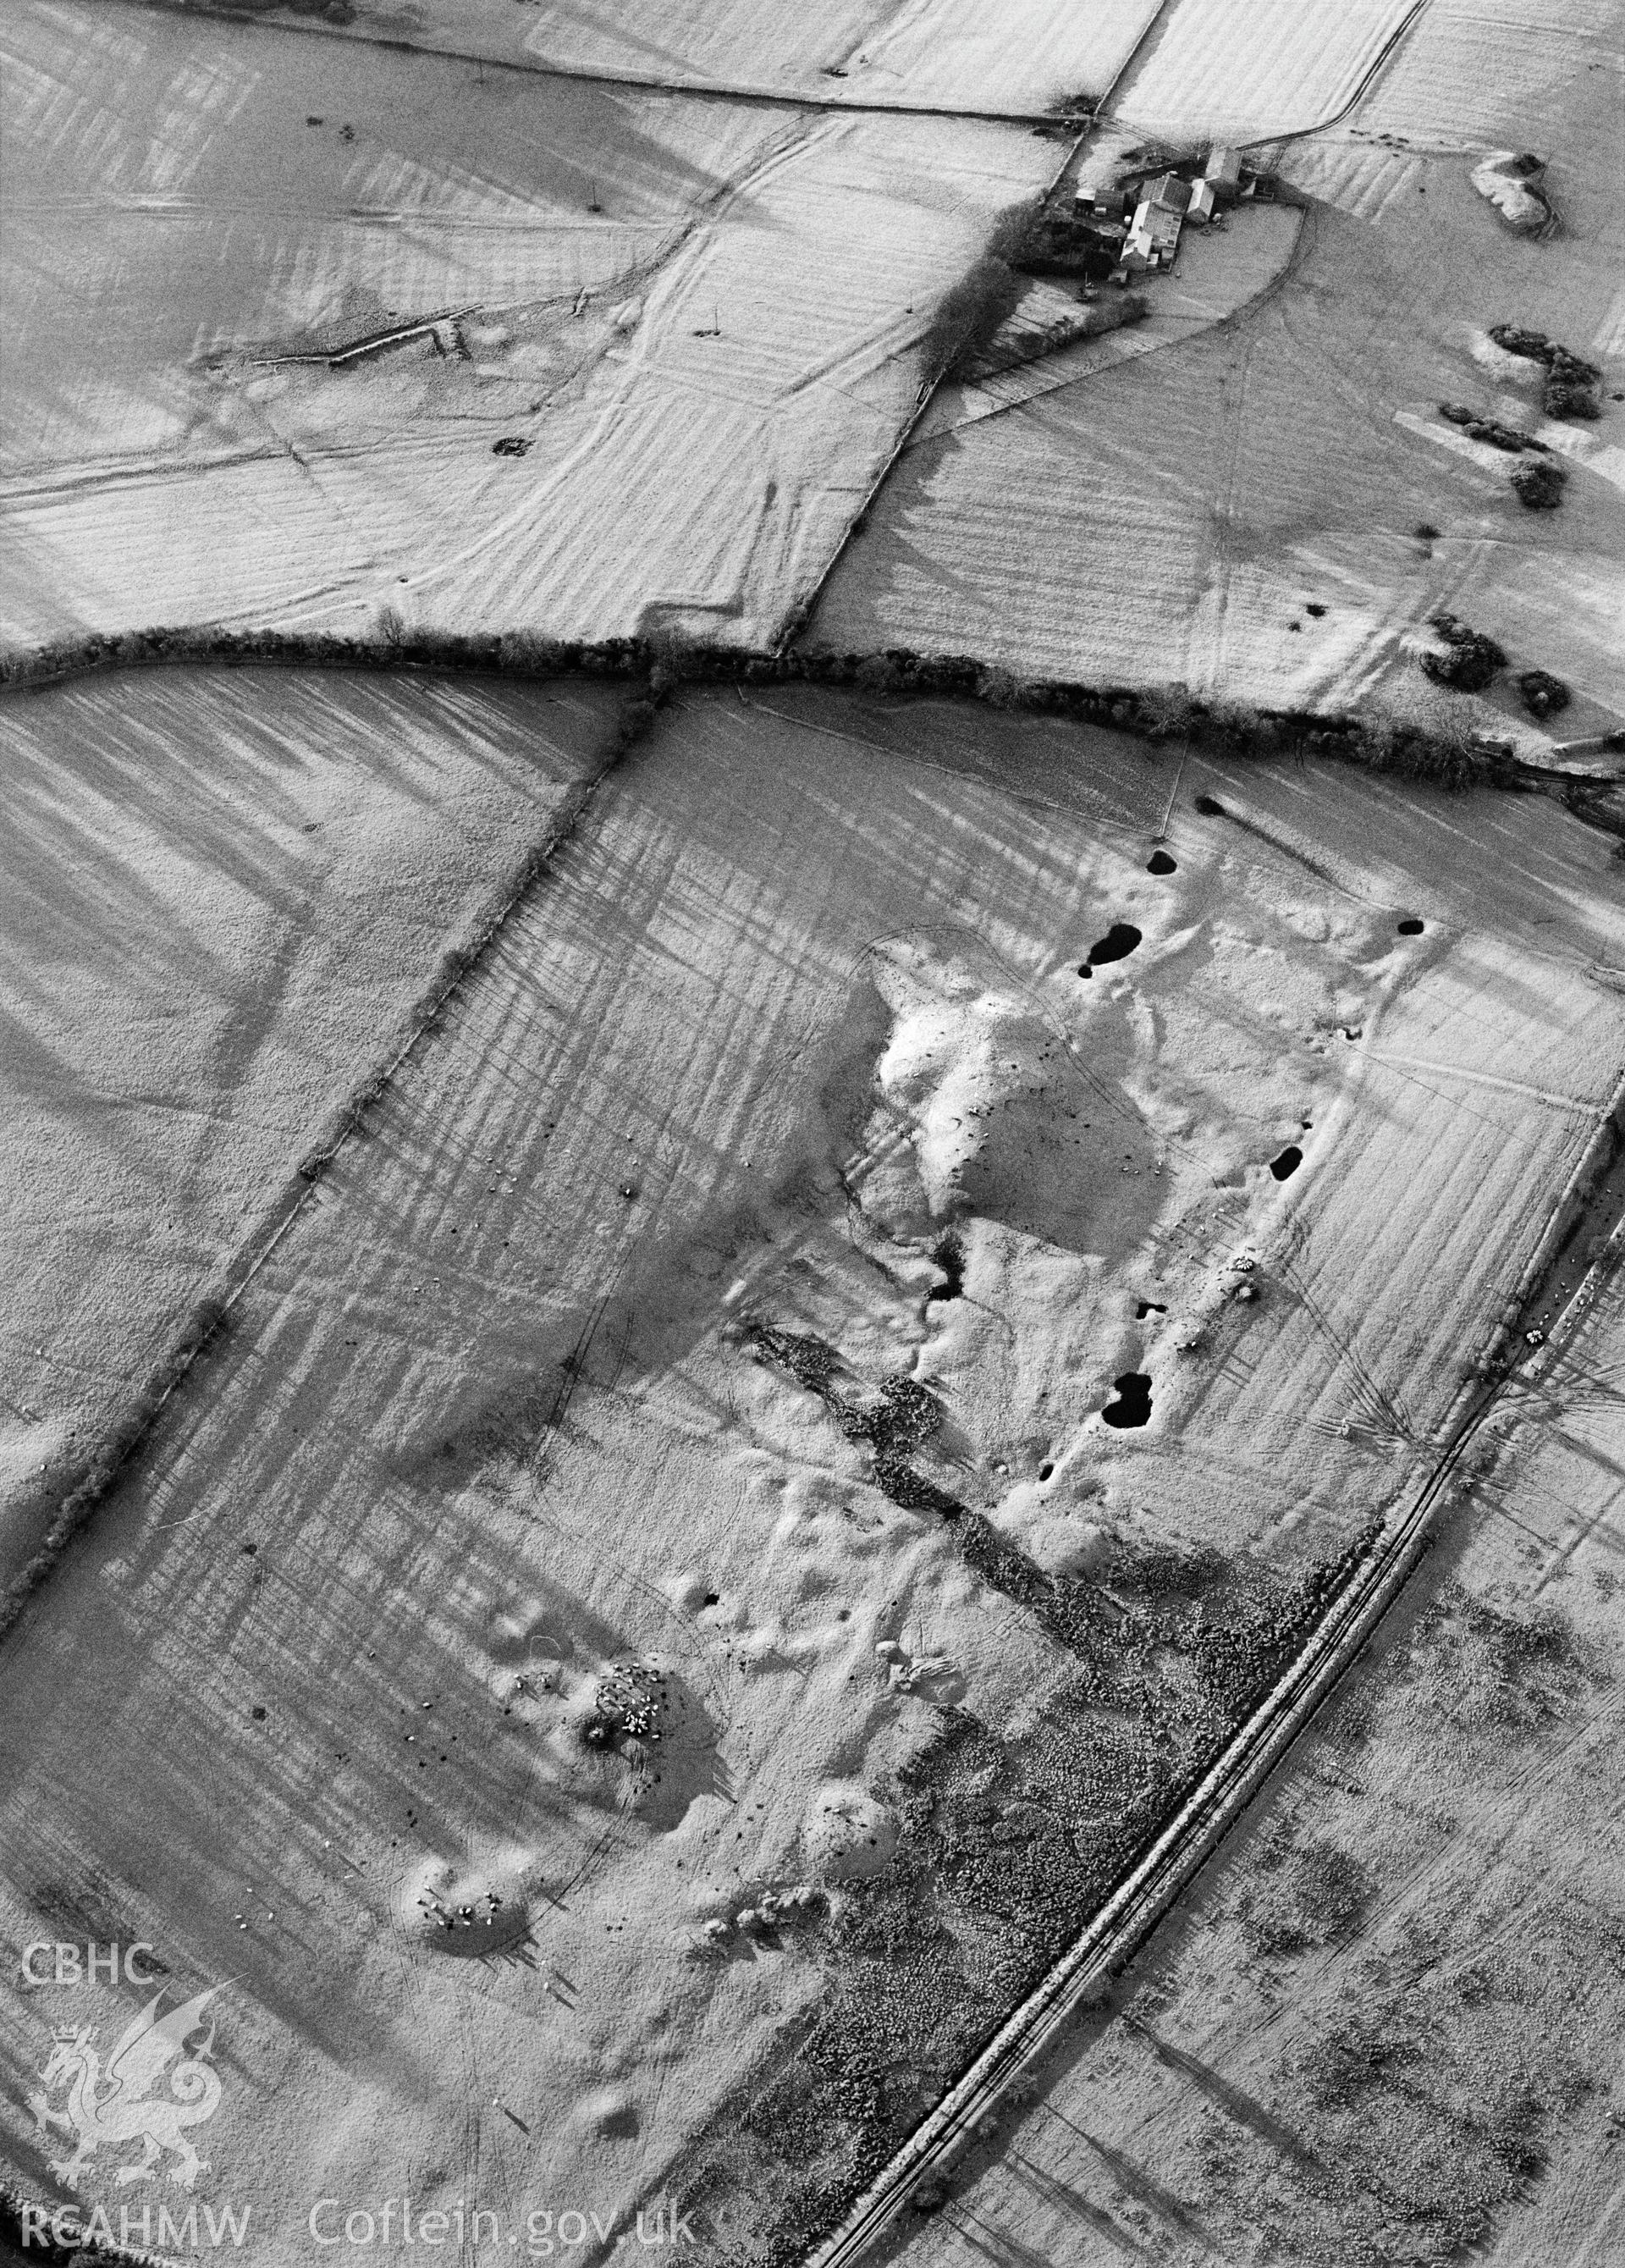 RCAHMW Black and white oblique aerial photograph of Ty-mawr Coal Workings, Llanfihangel Ysgeifiog, taken on 10/01/1999 by Toby Driver